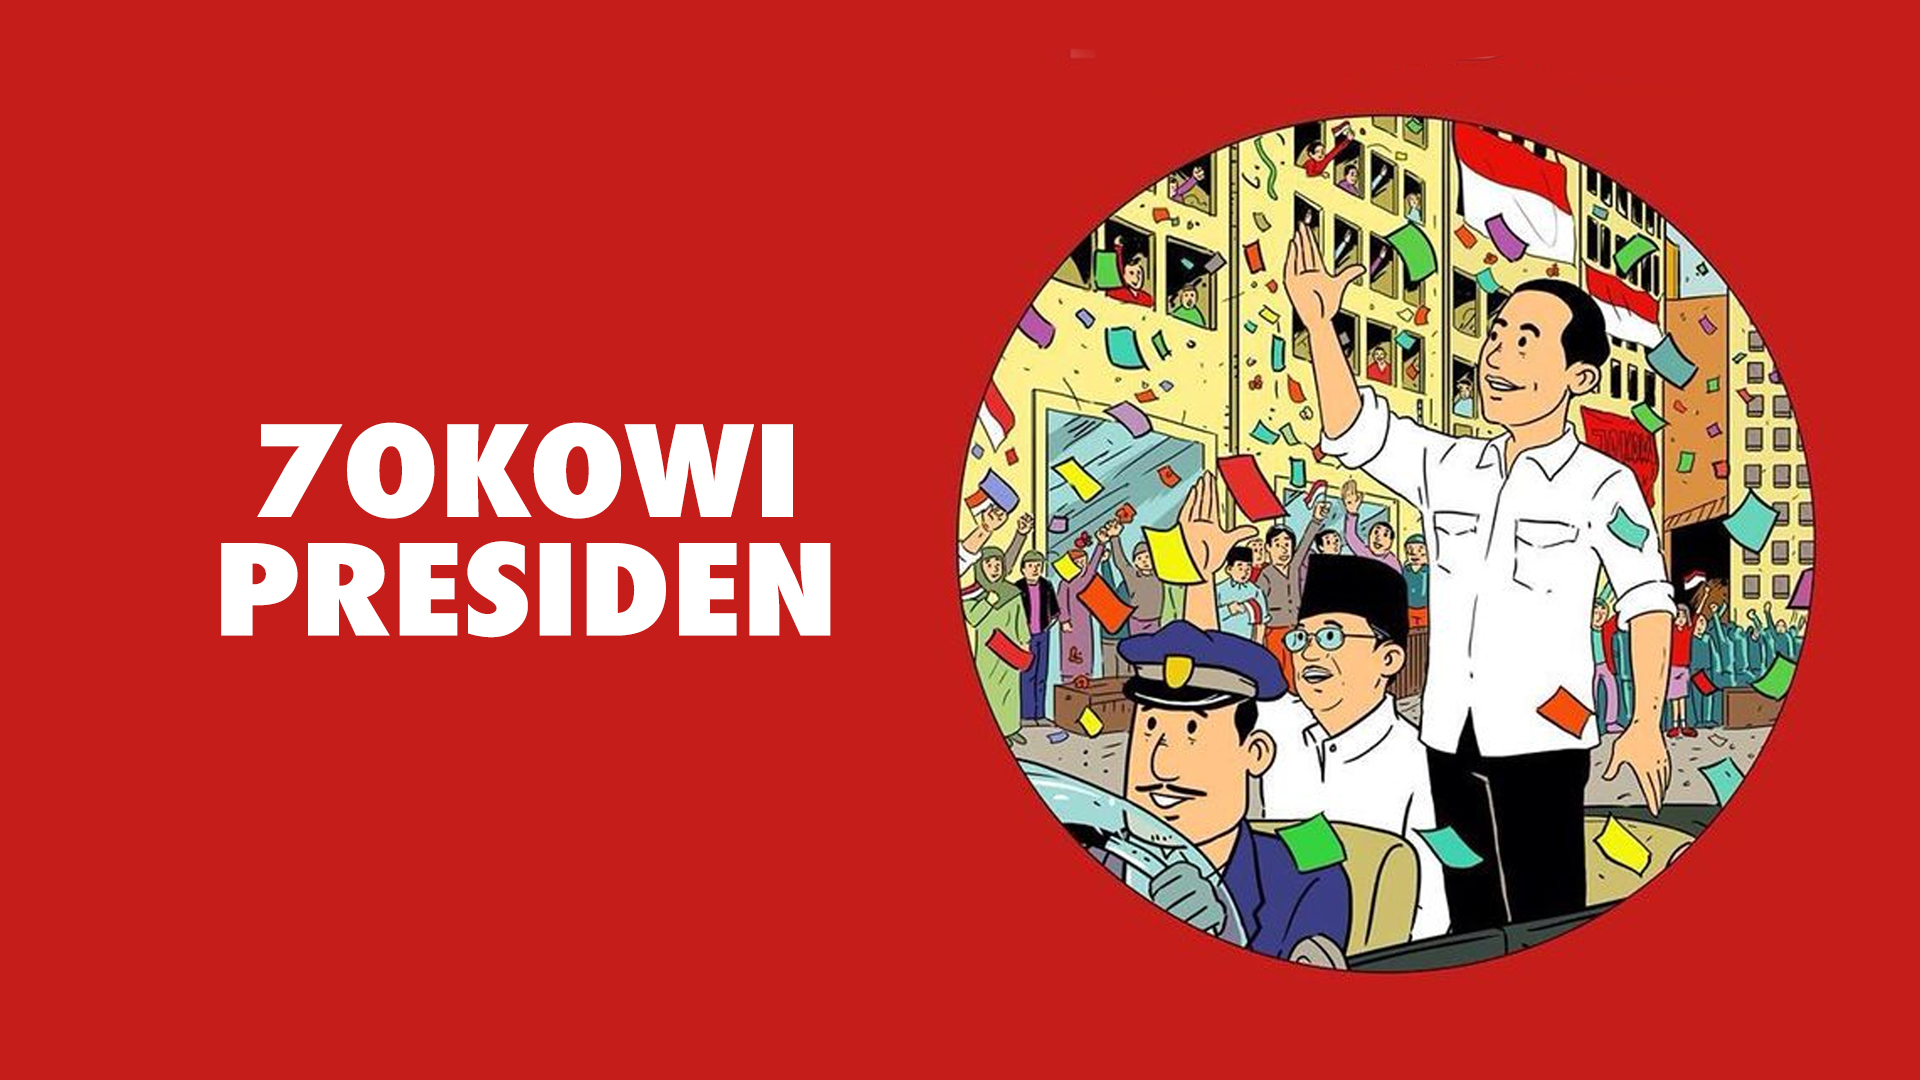 The Story of Jokowi Impromptu Walkabout Campaign